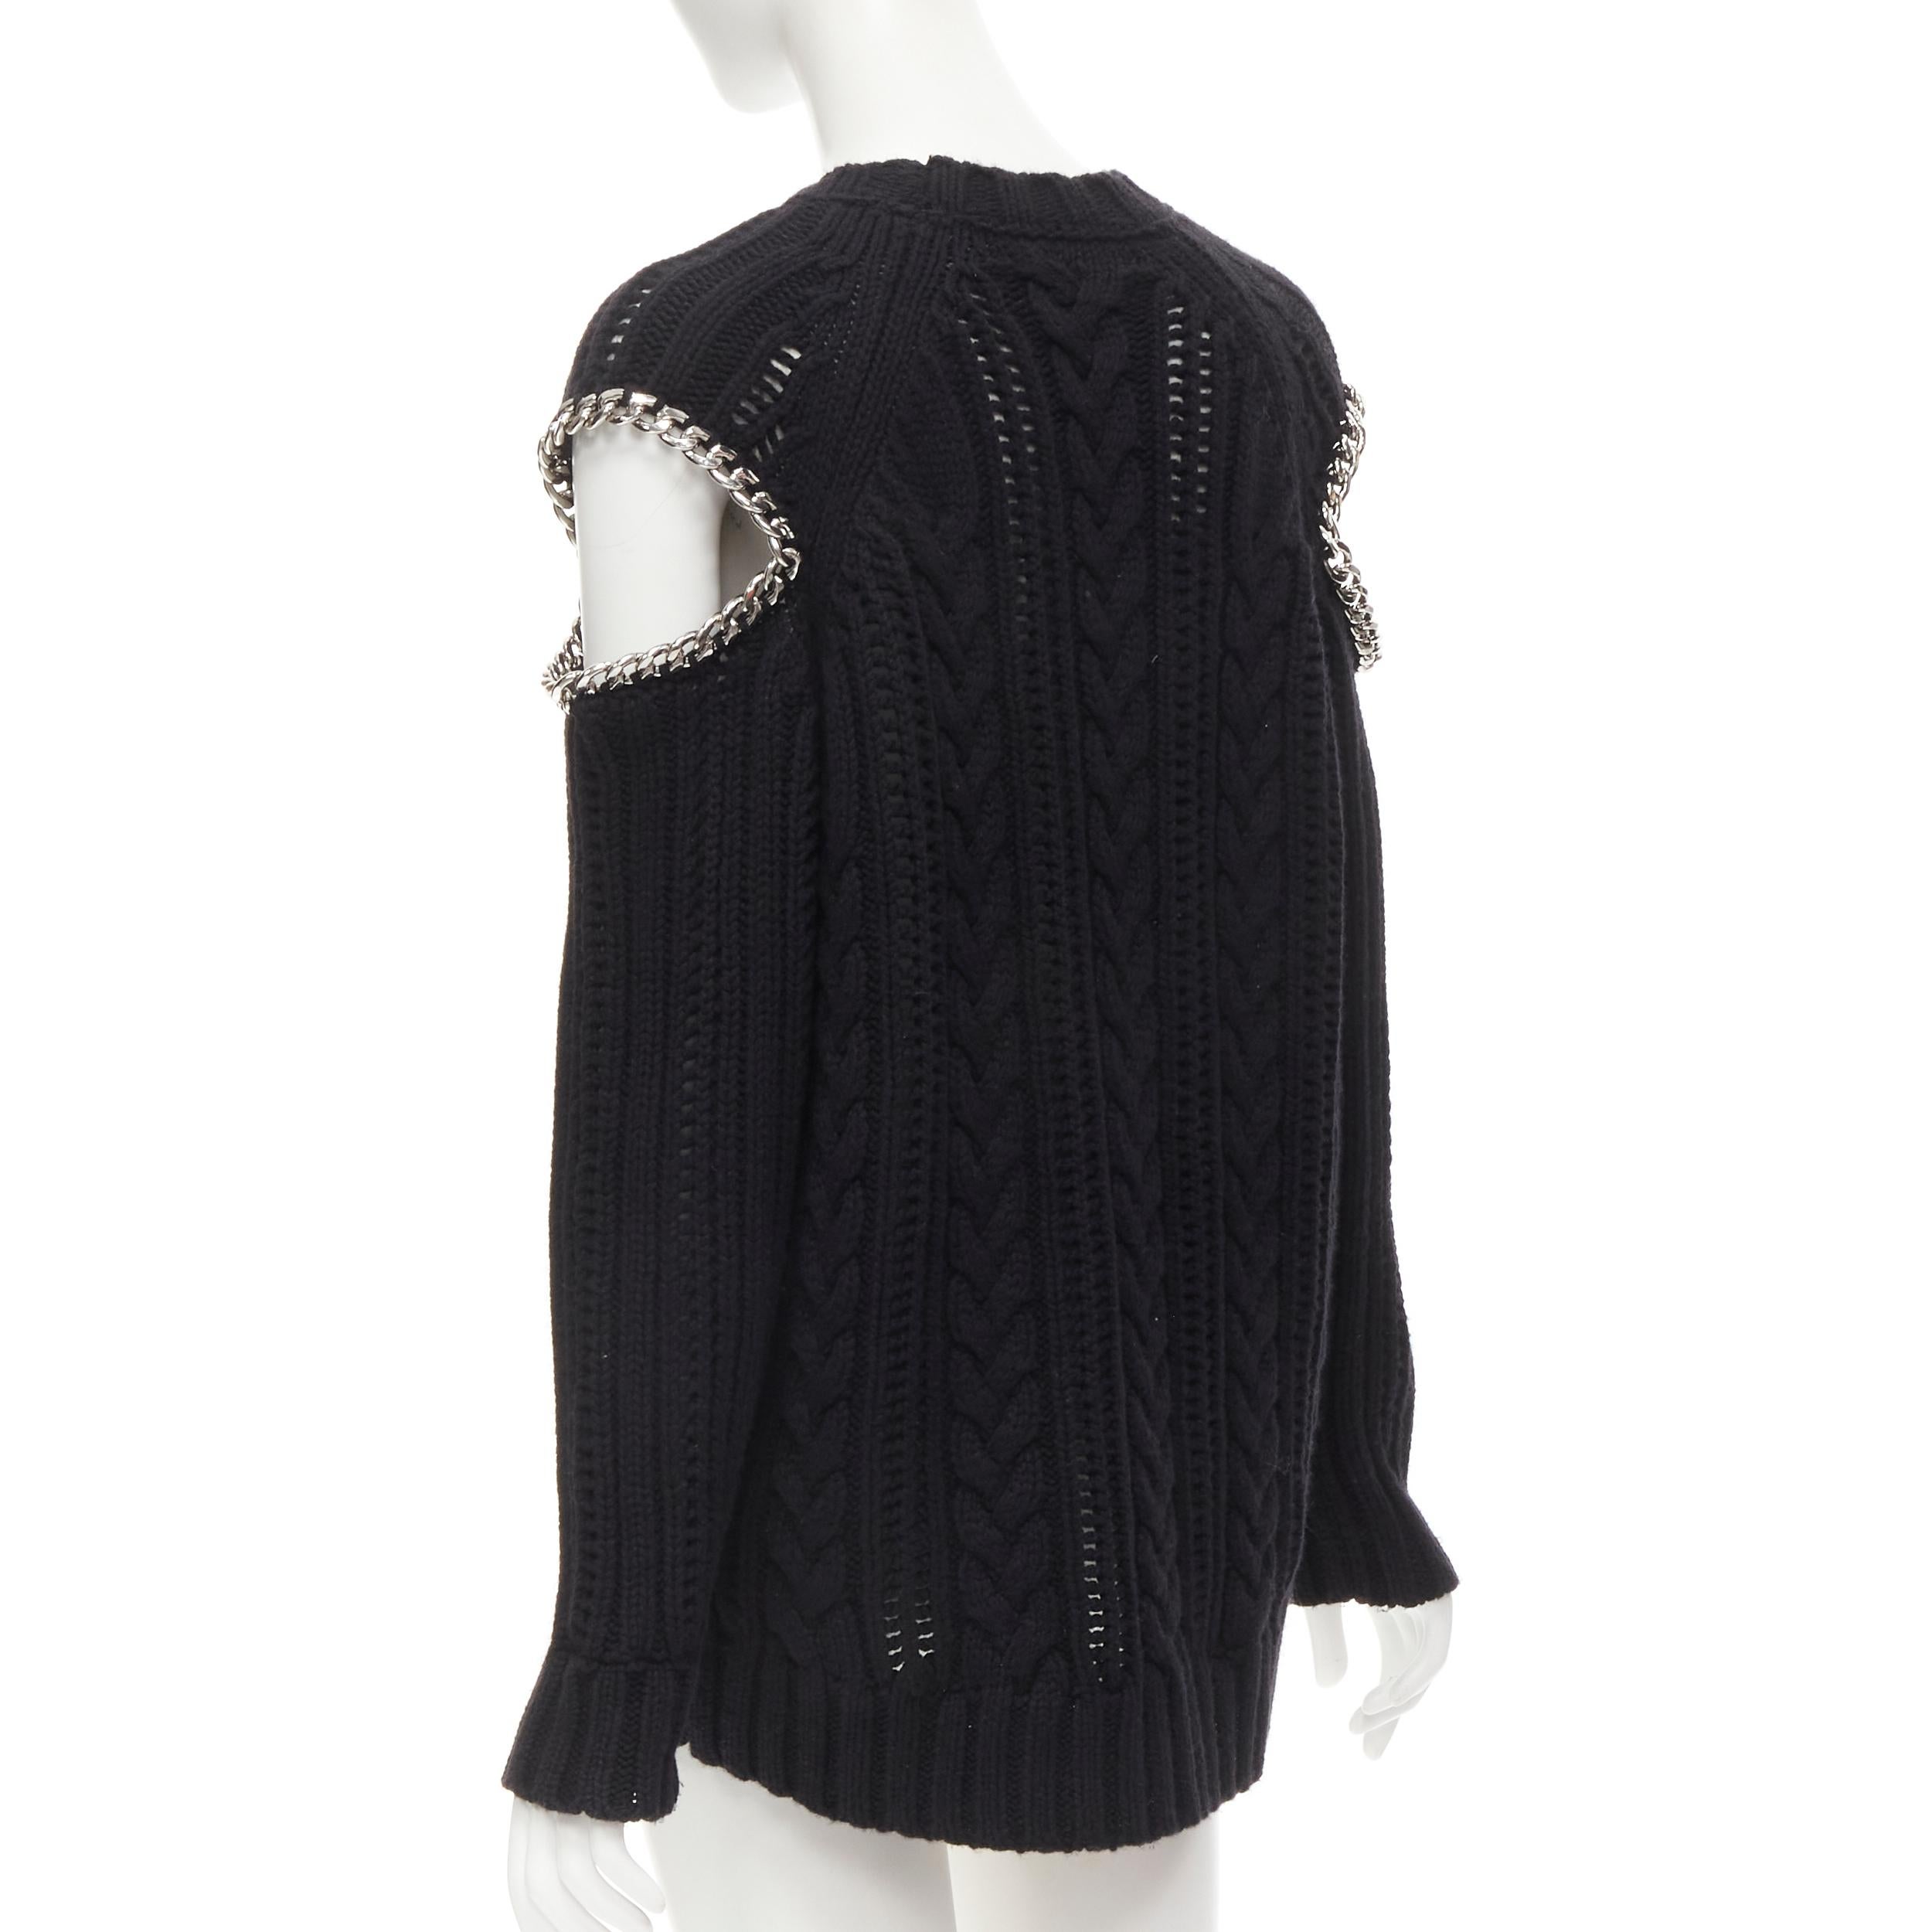 Black ALEXANDER MCQUEEN 100% cashmere black silver chain cable knit cut out sweater M